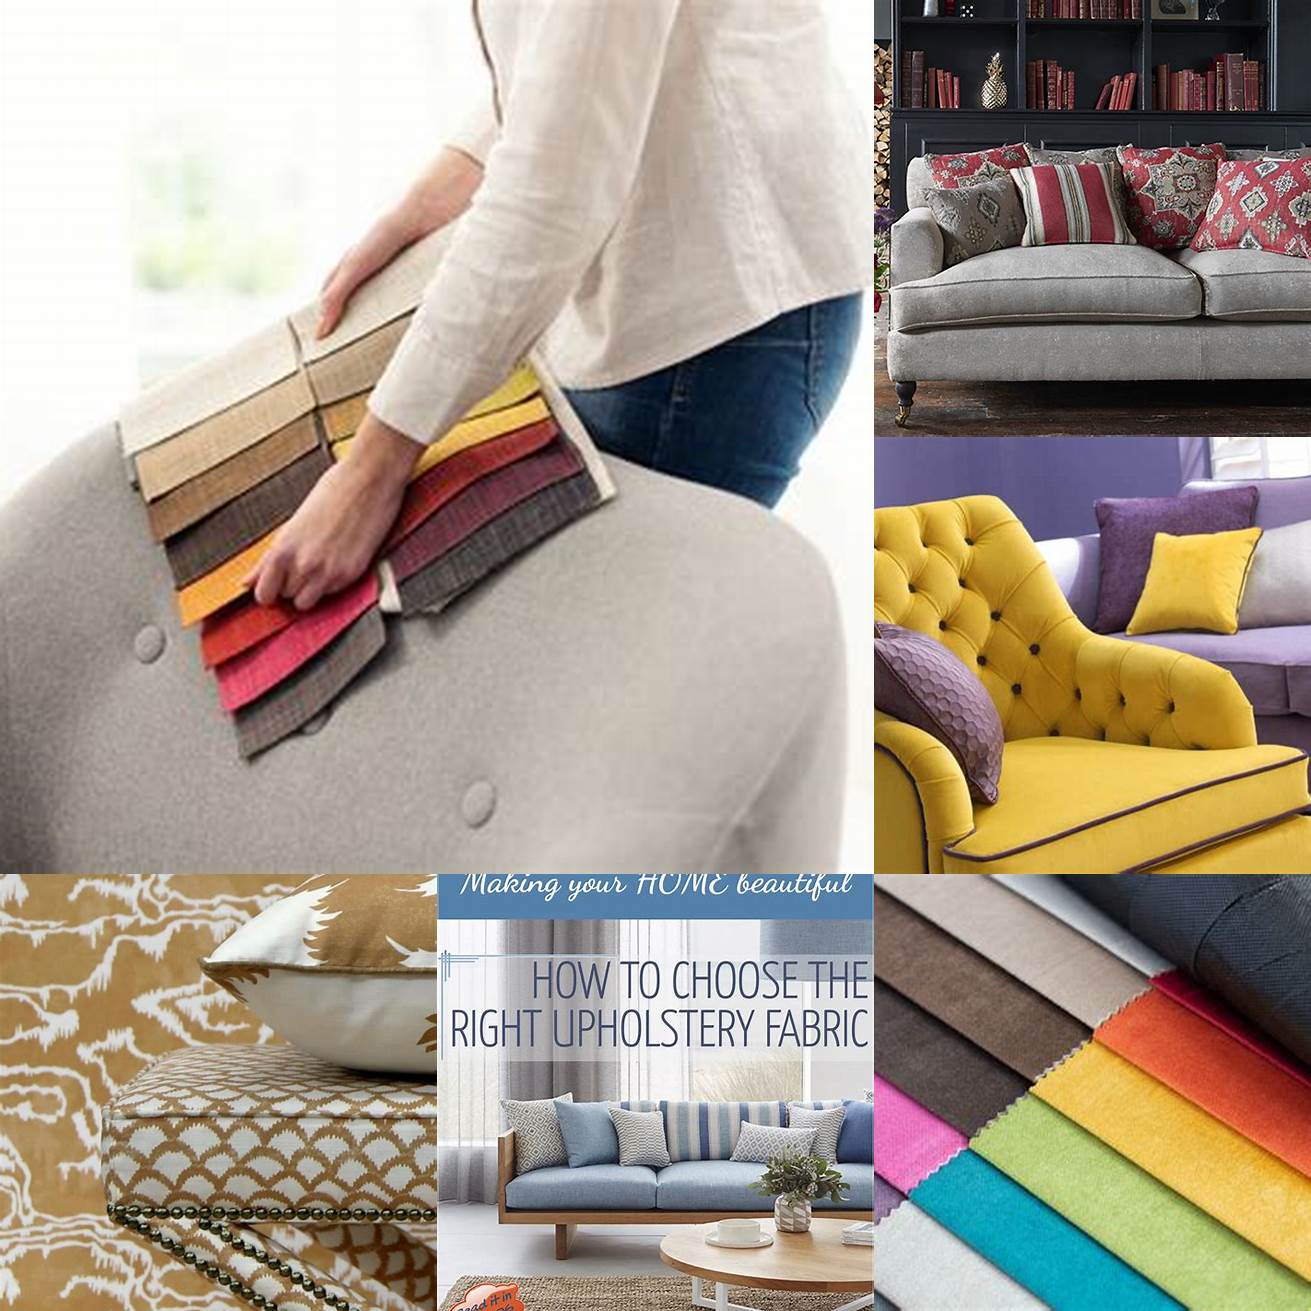 Choose an upholstery material that matches your lifestyle - for example if you have kids or pets choose a material that is easy to clean and maintain